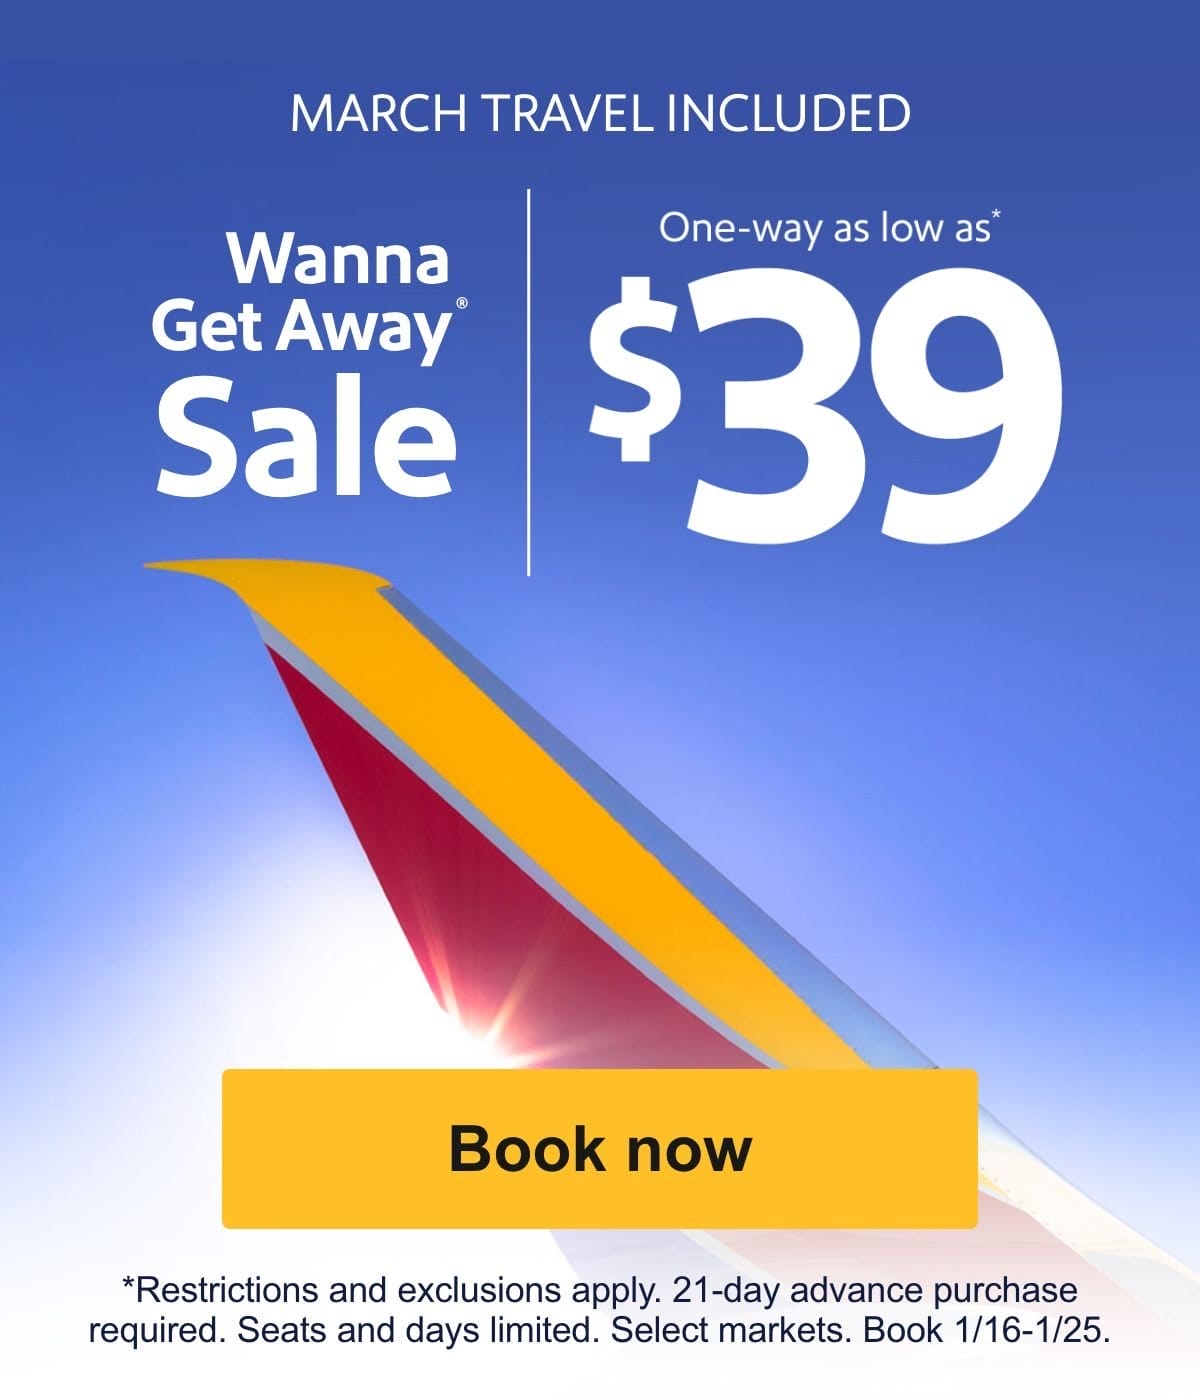  MARCH TRAVEL INCLUDED Wanna Get Away Sale One-way as low as* \\$39 [Book now] *Restrictions and exclusions apply. 21-day advance purchase required. Seats and days limited. Select markets. Book 1/16-1/25.